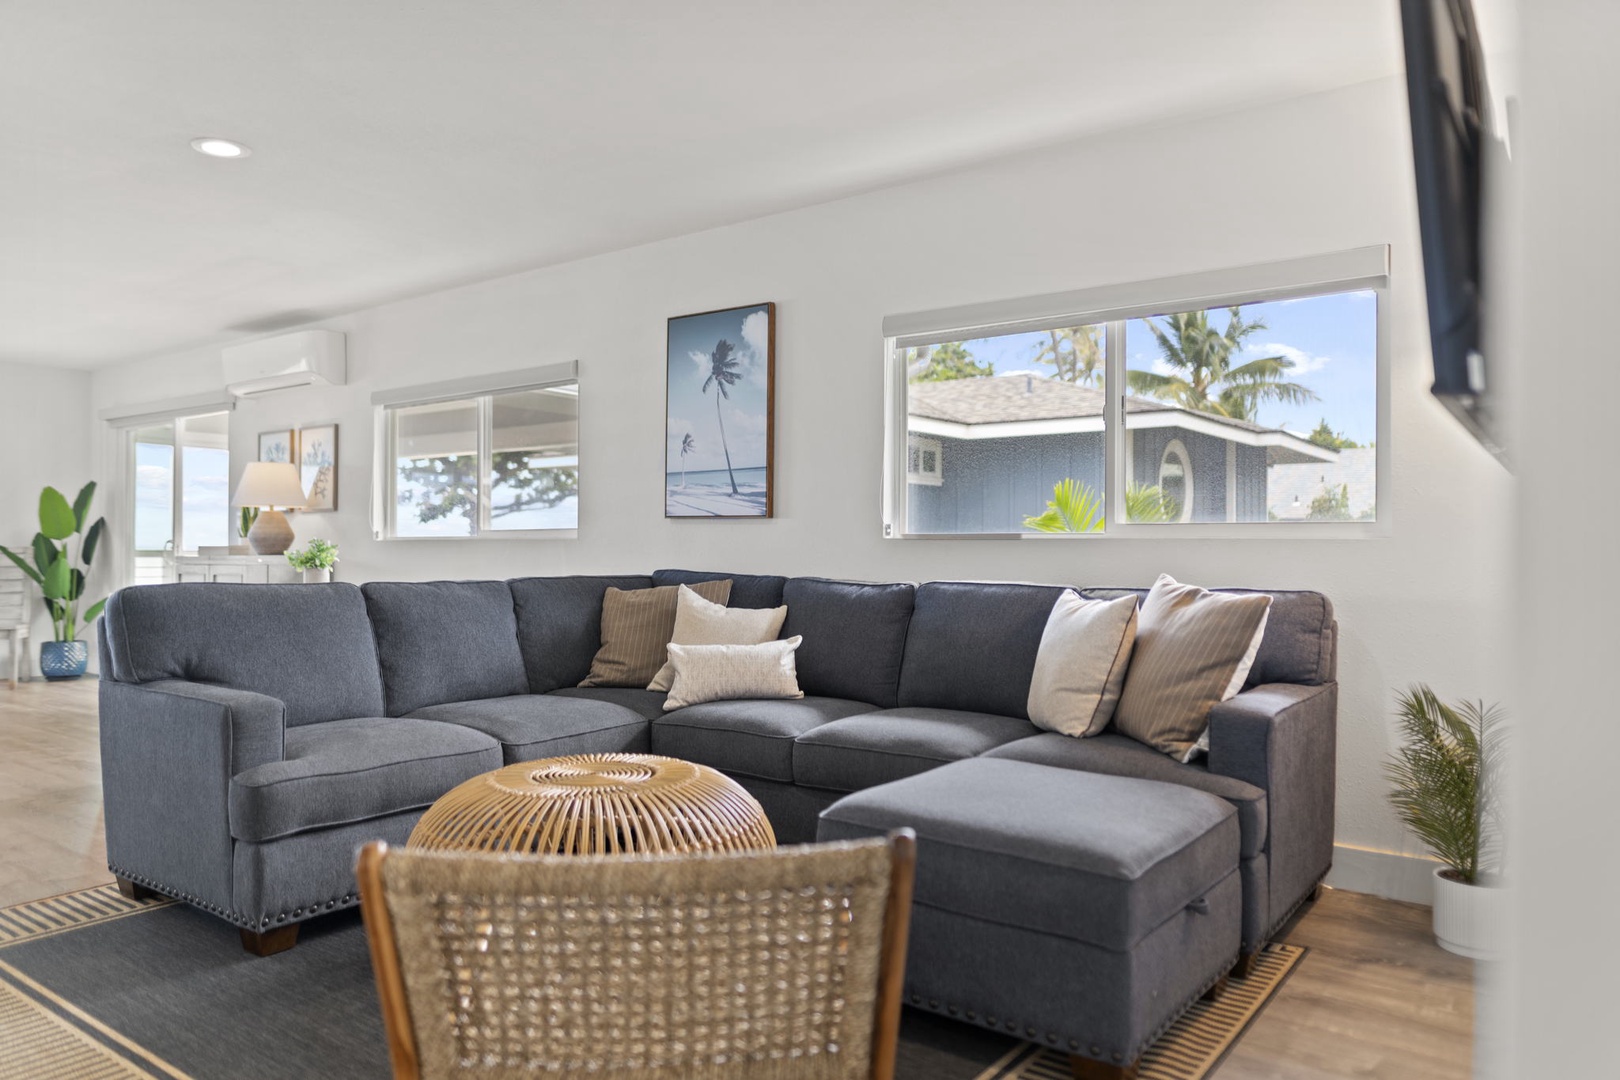 Haleiwa Vacation Rentals, Hale Nalu - The living area is drenched in natural light